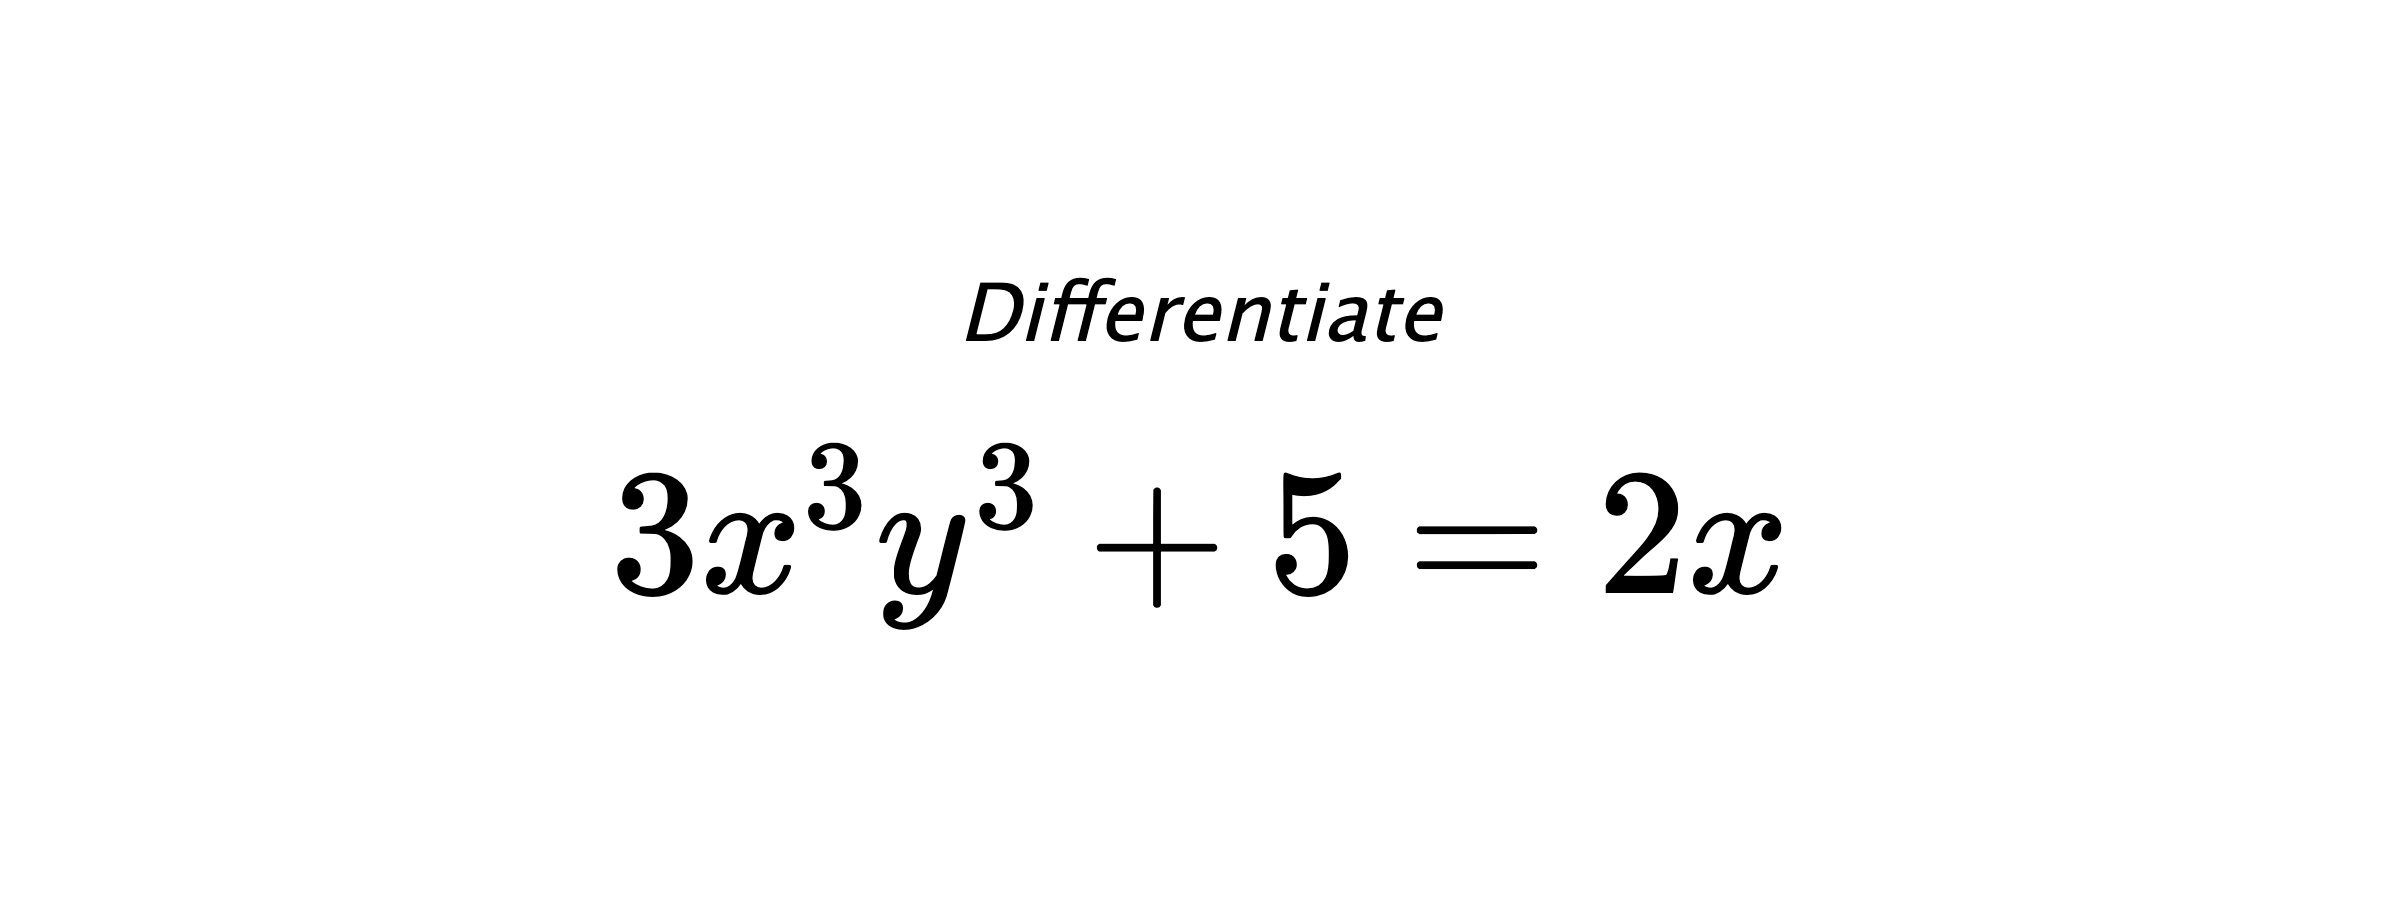 Differentiate $ 3x^3y^3+5 = 2x $